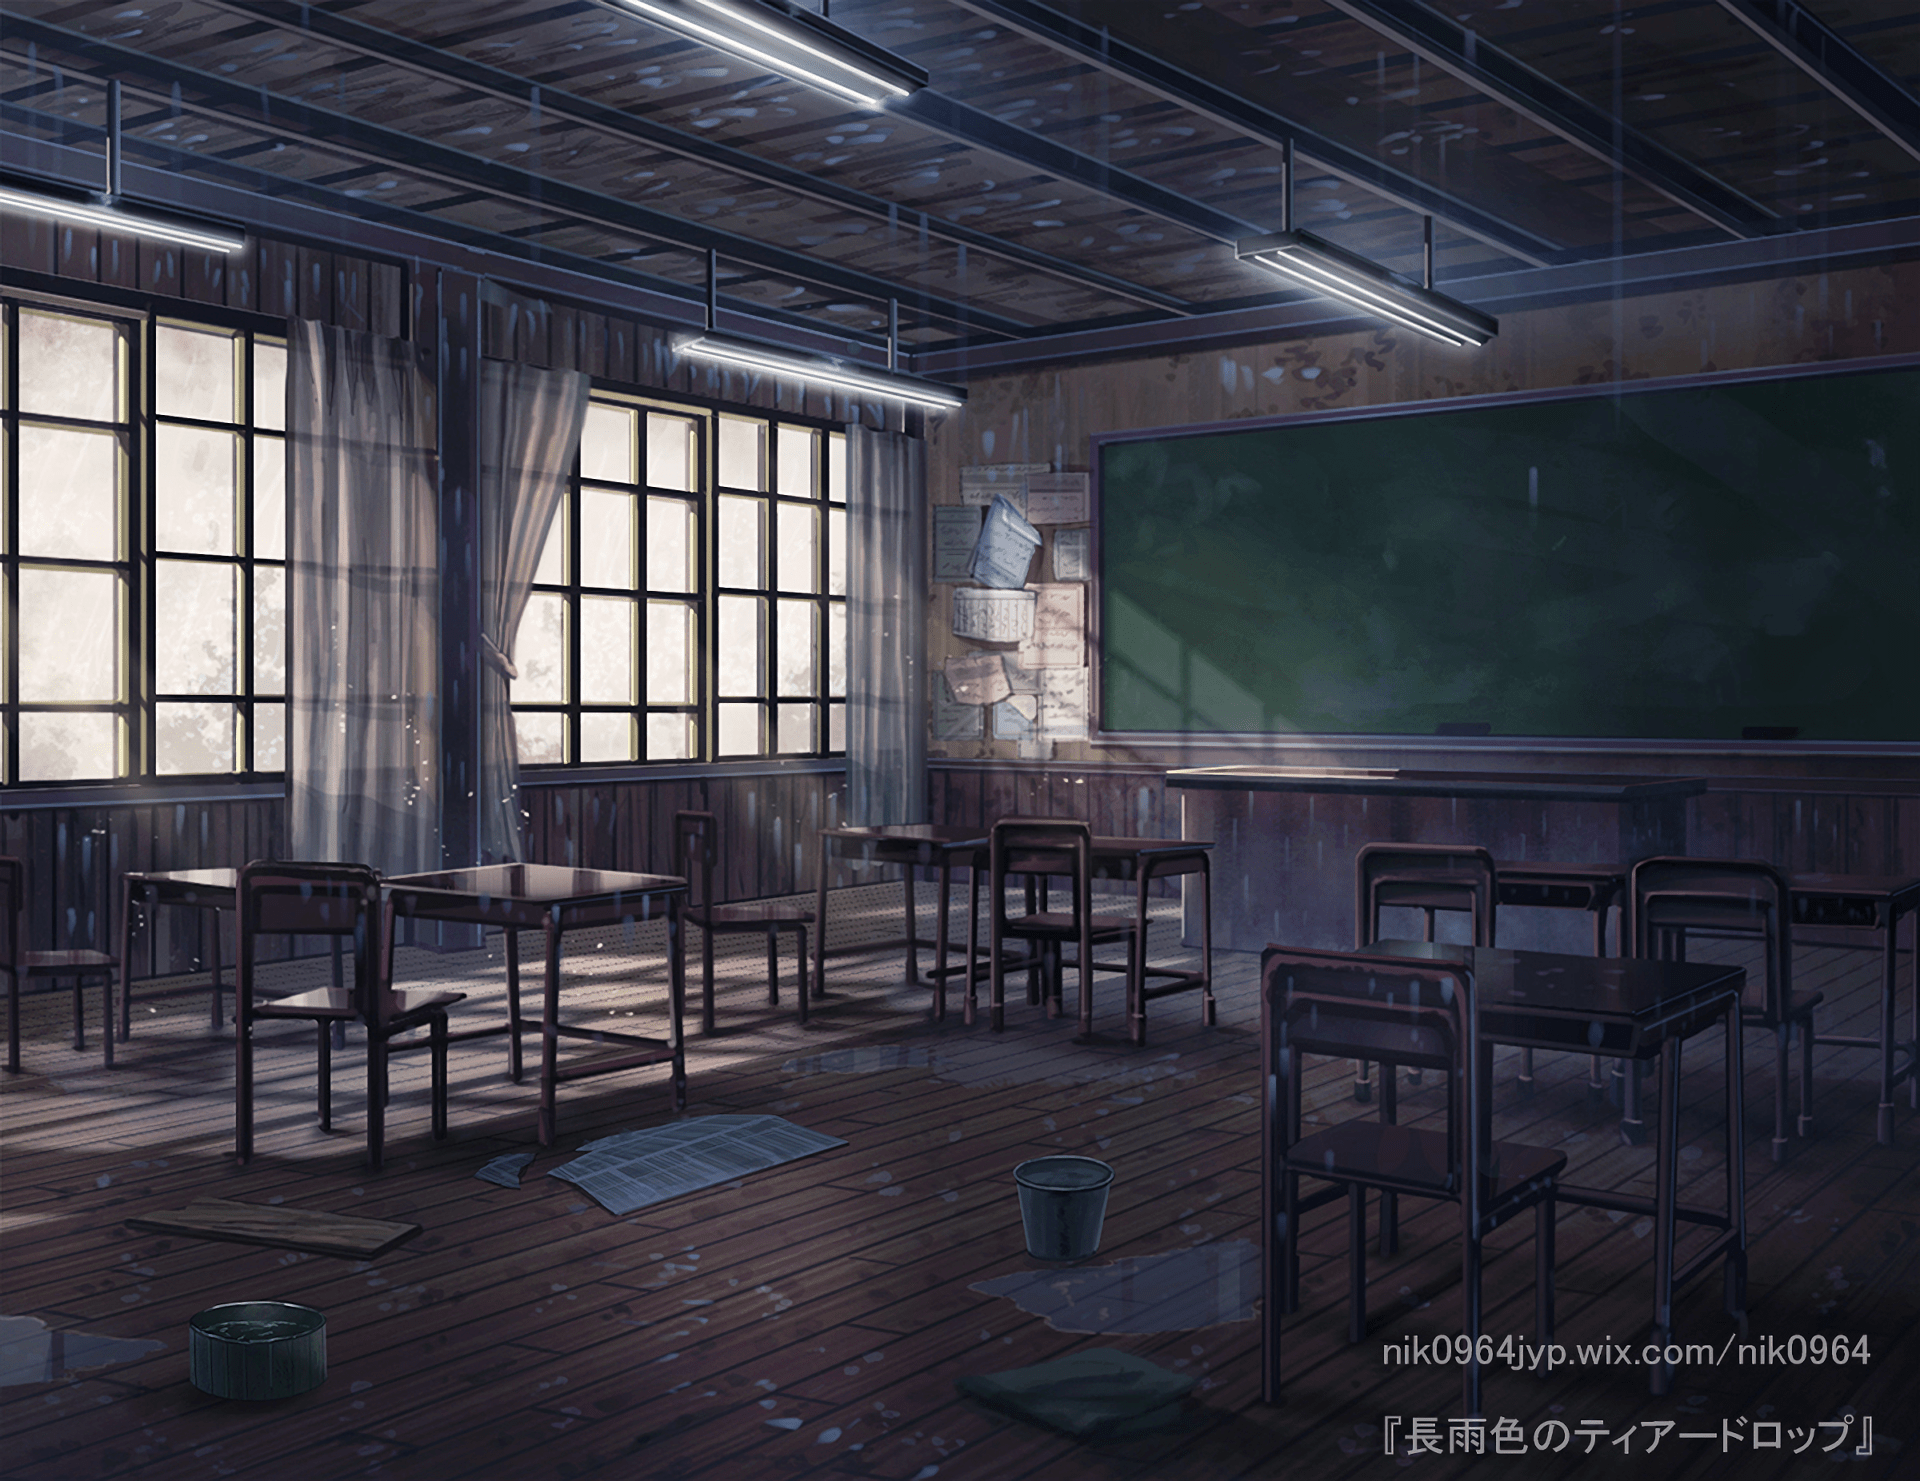 School HD Wallpaper and Background